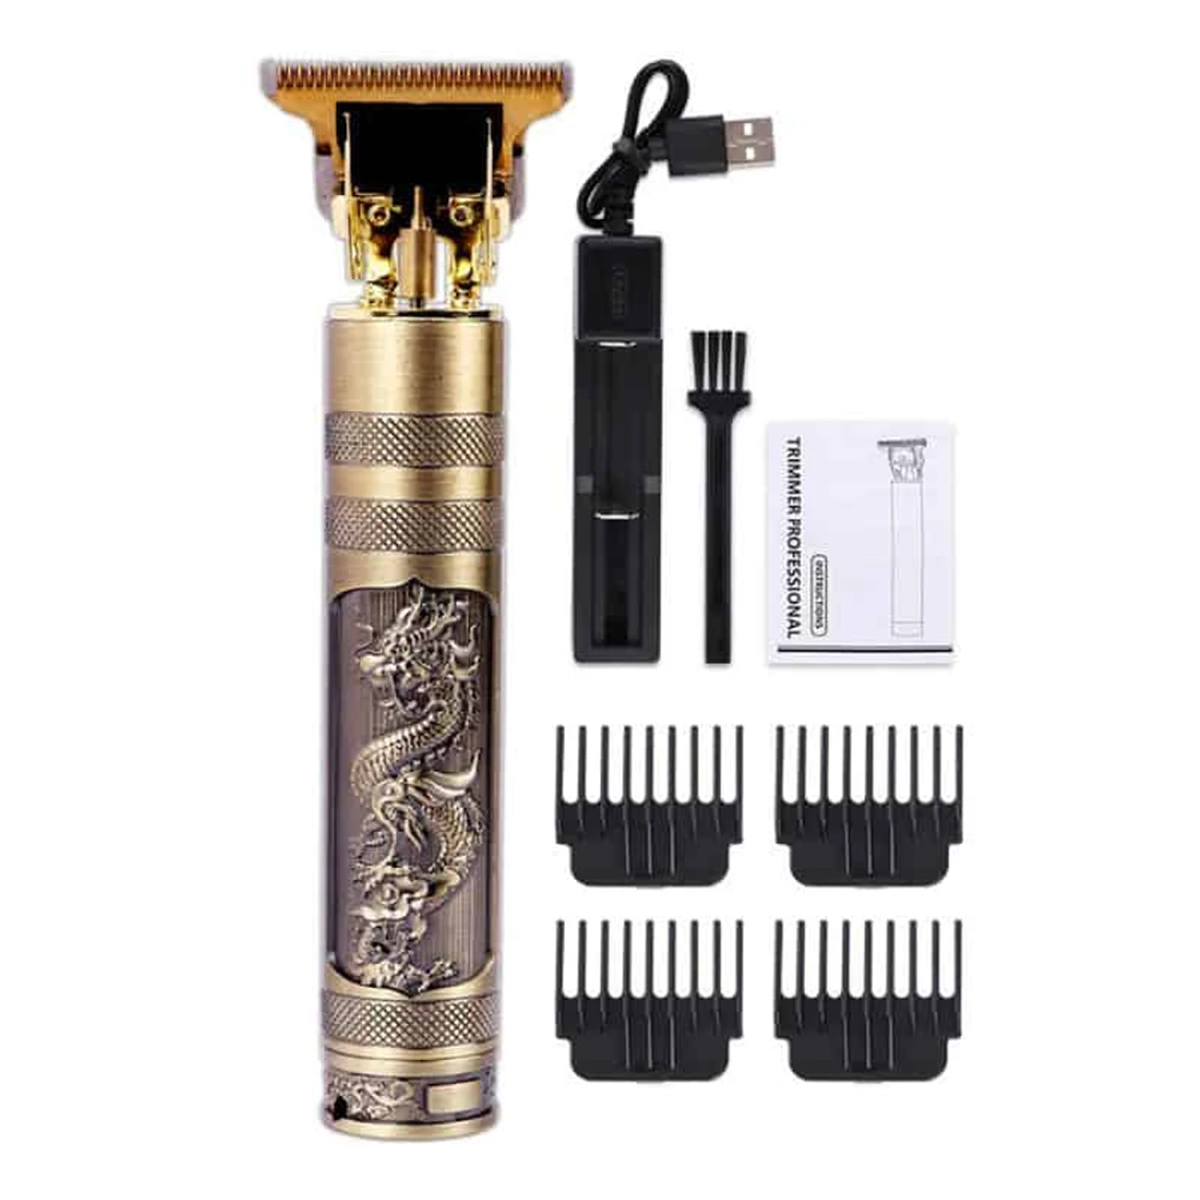 Vintage T9 Hair Clipper And Beard Trimmer for Men